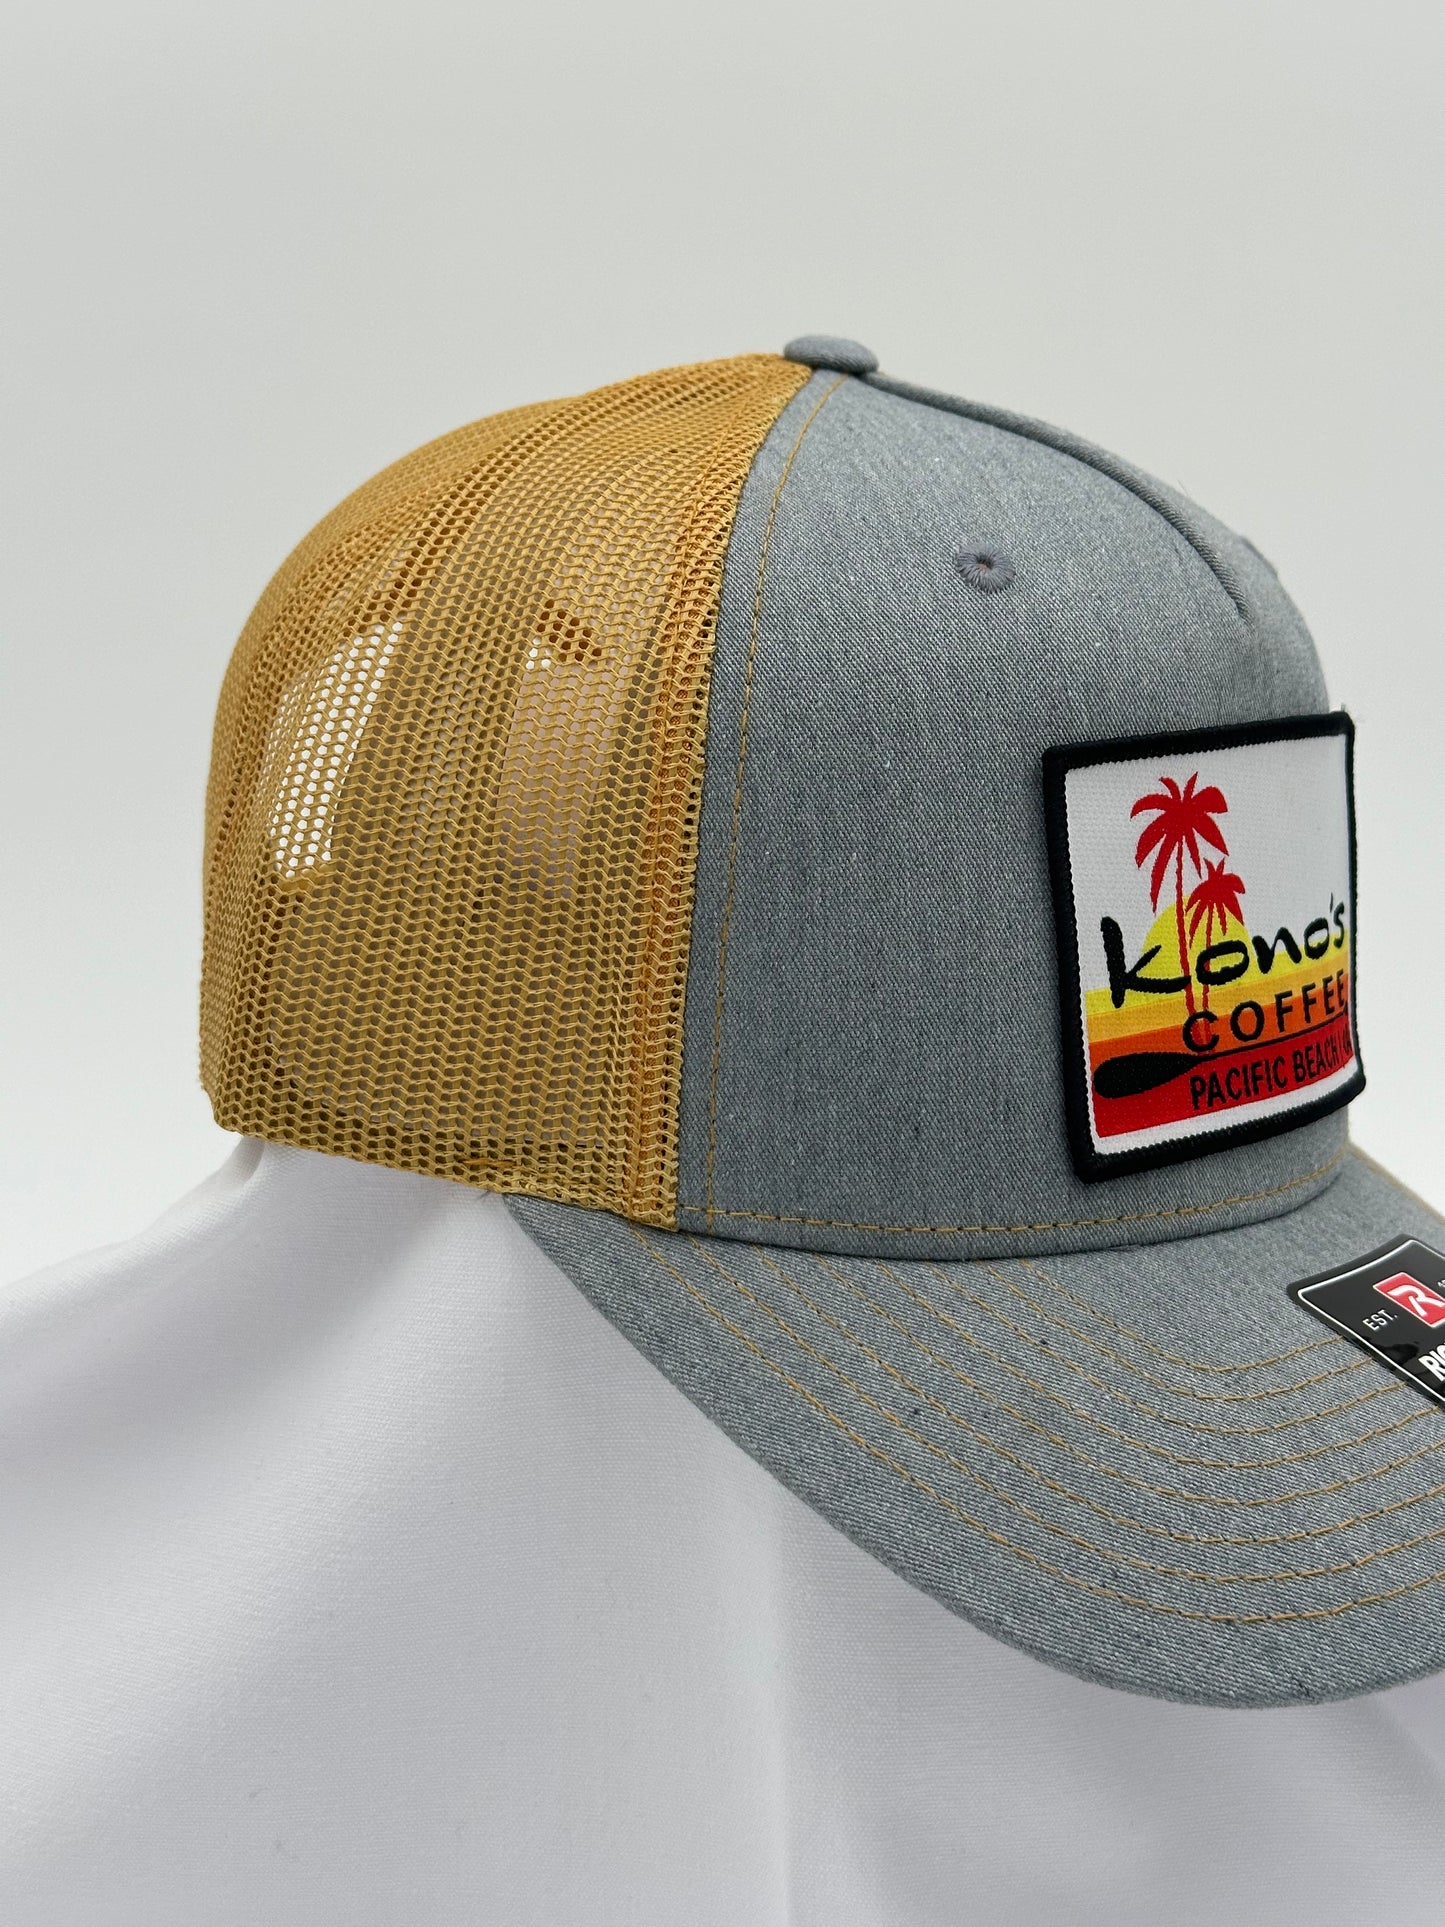 MESH BACK PALM TREES PATCH HAT